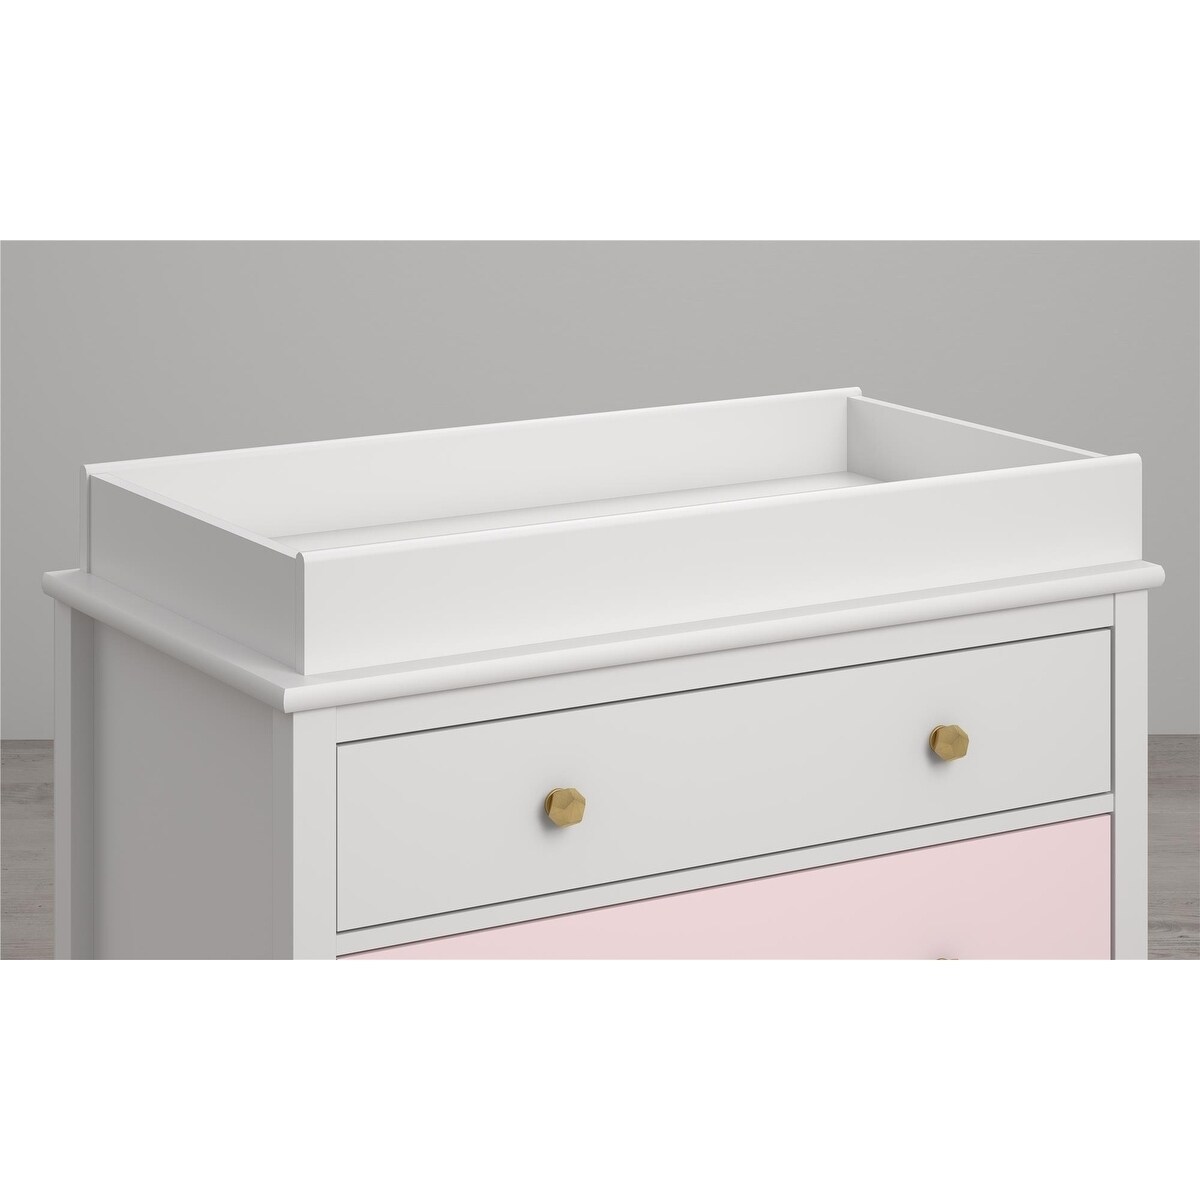 Shop Little Seeds Changing Table Topper Overstock 16935814